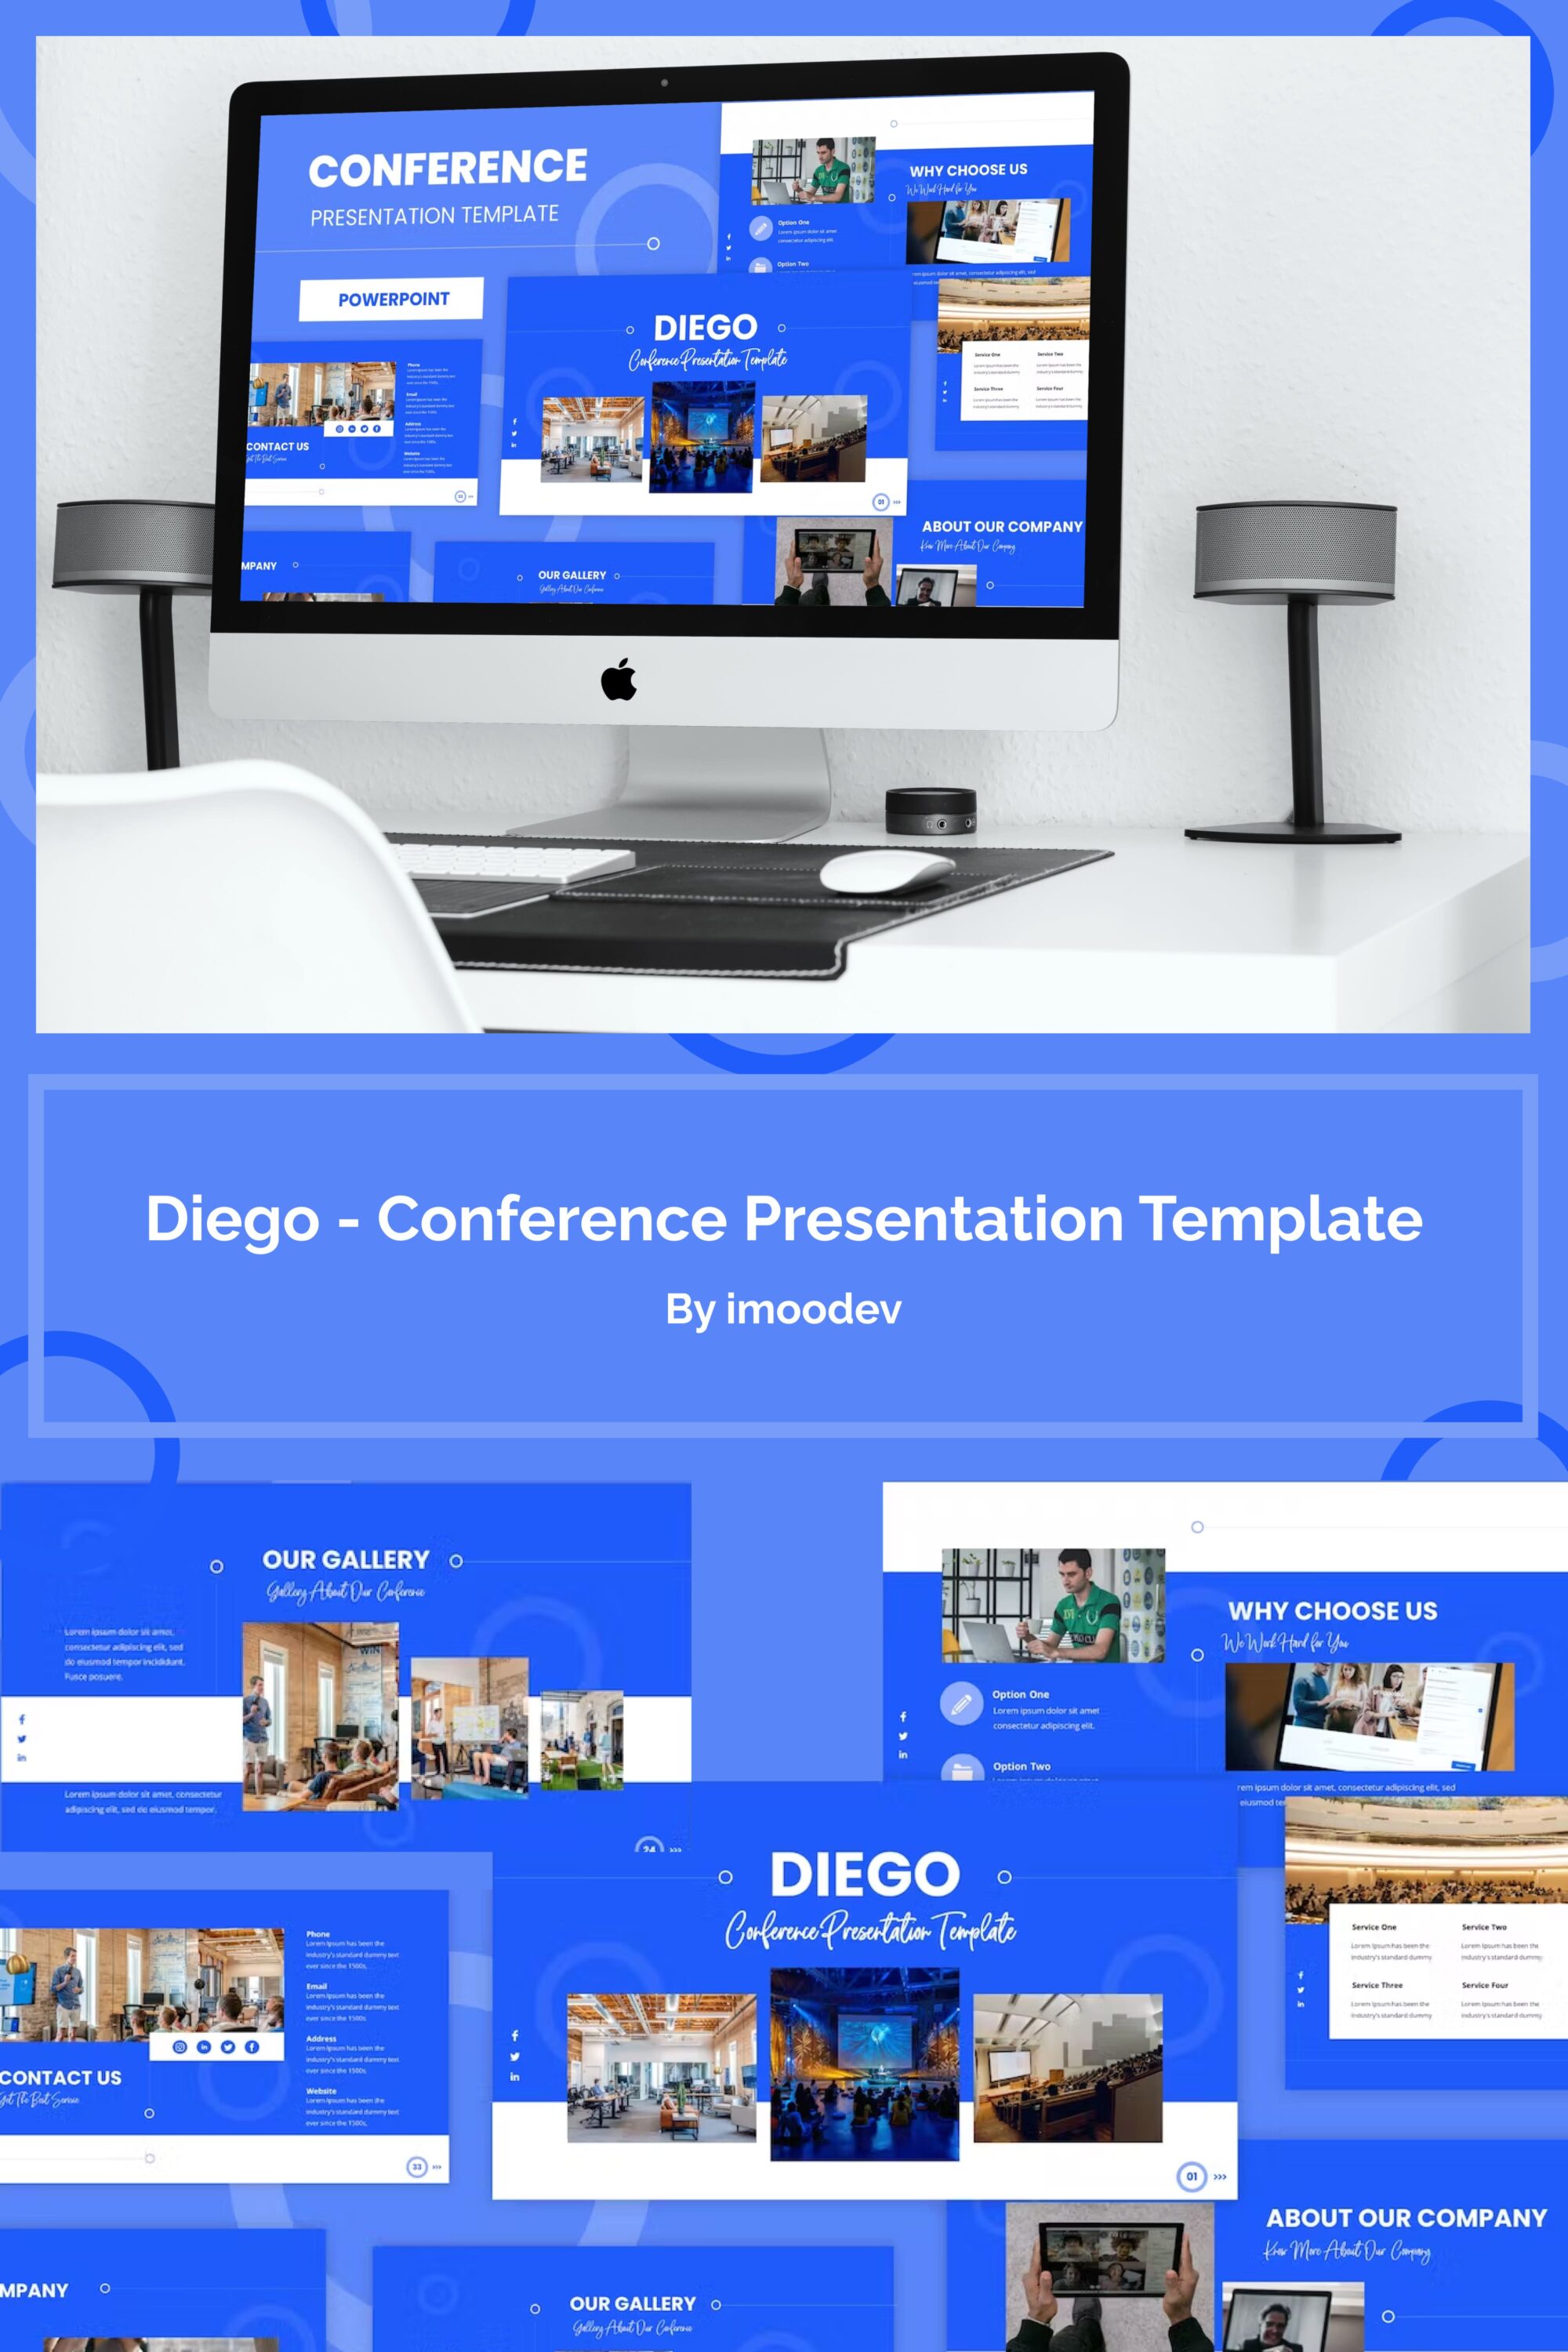 Diego conference presentation template of pinterest.